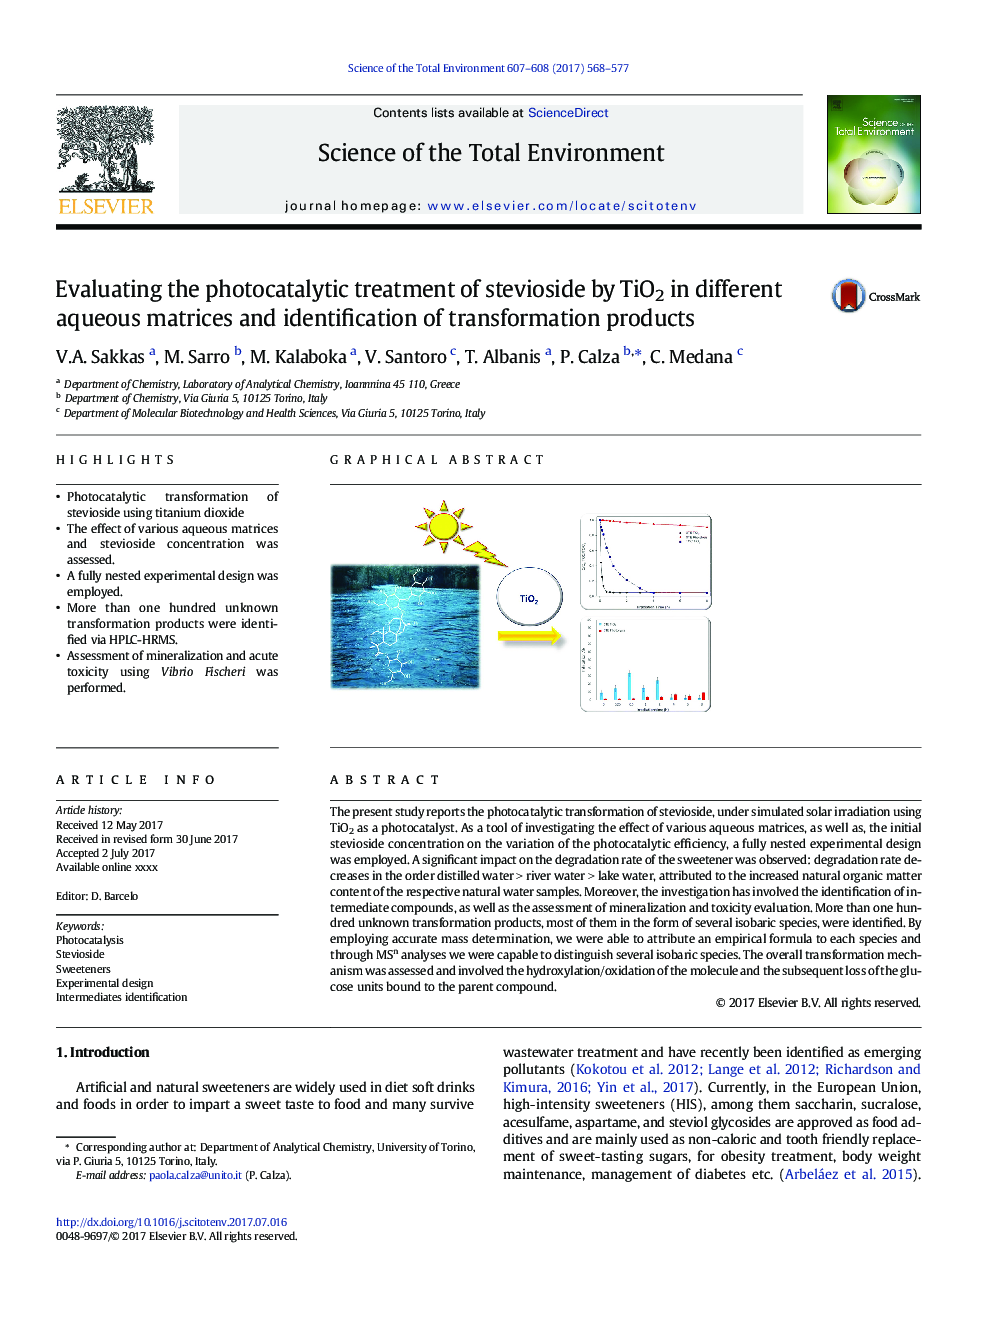 Evaluating the photocatalytic treatment of stevioside by TiO2 in different aqueous matrices and identification of transformation products